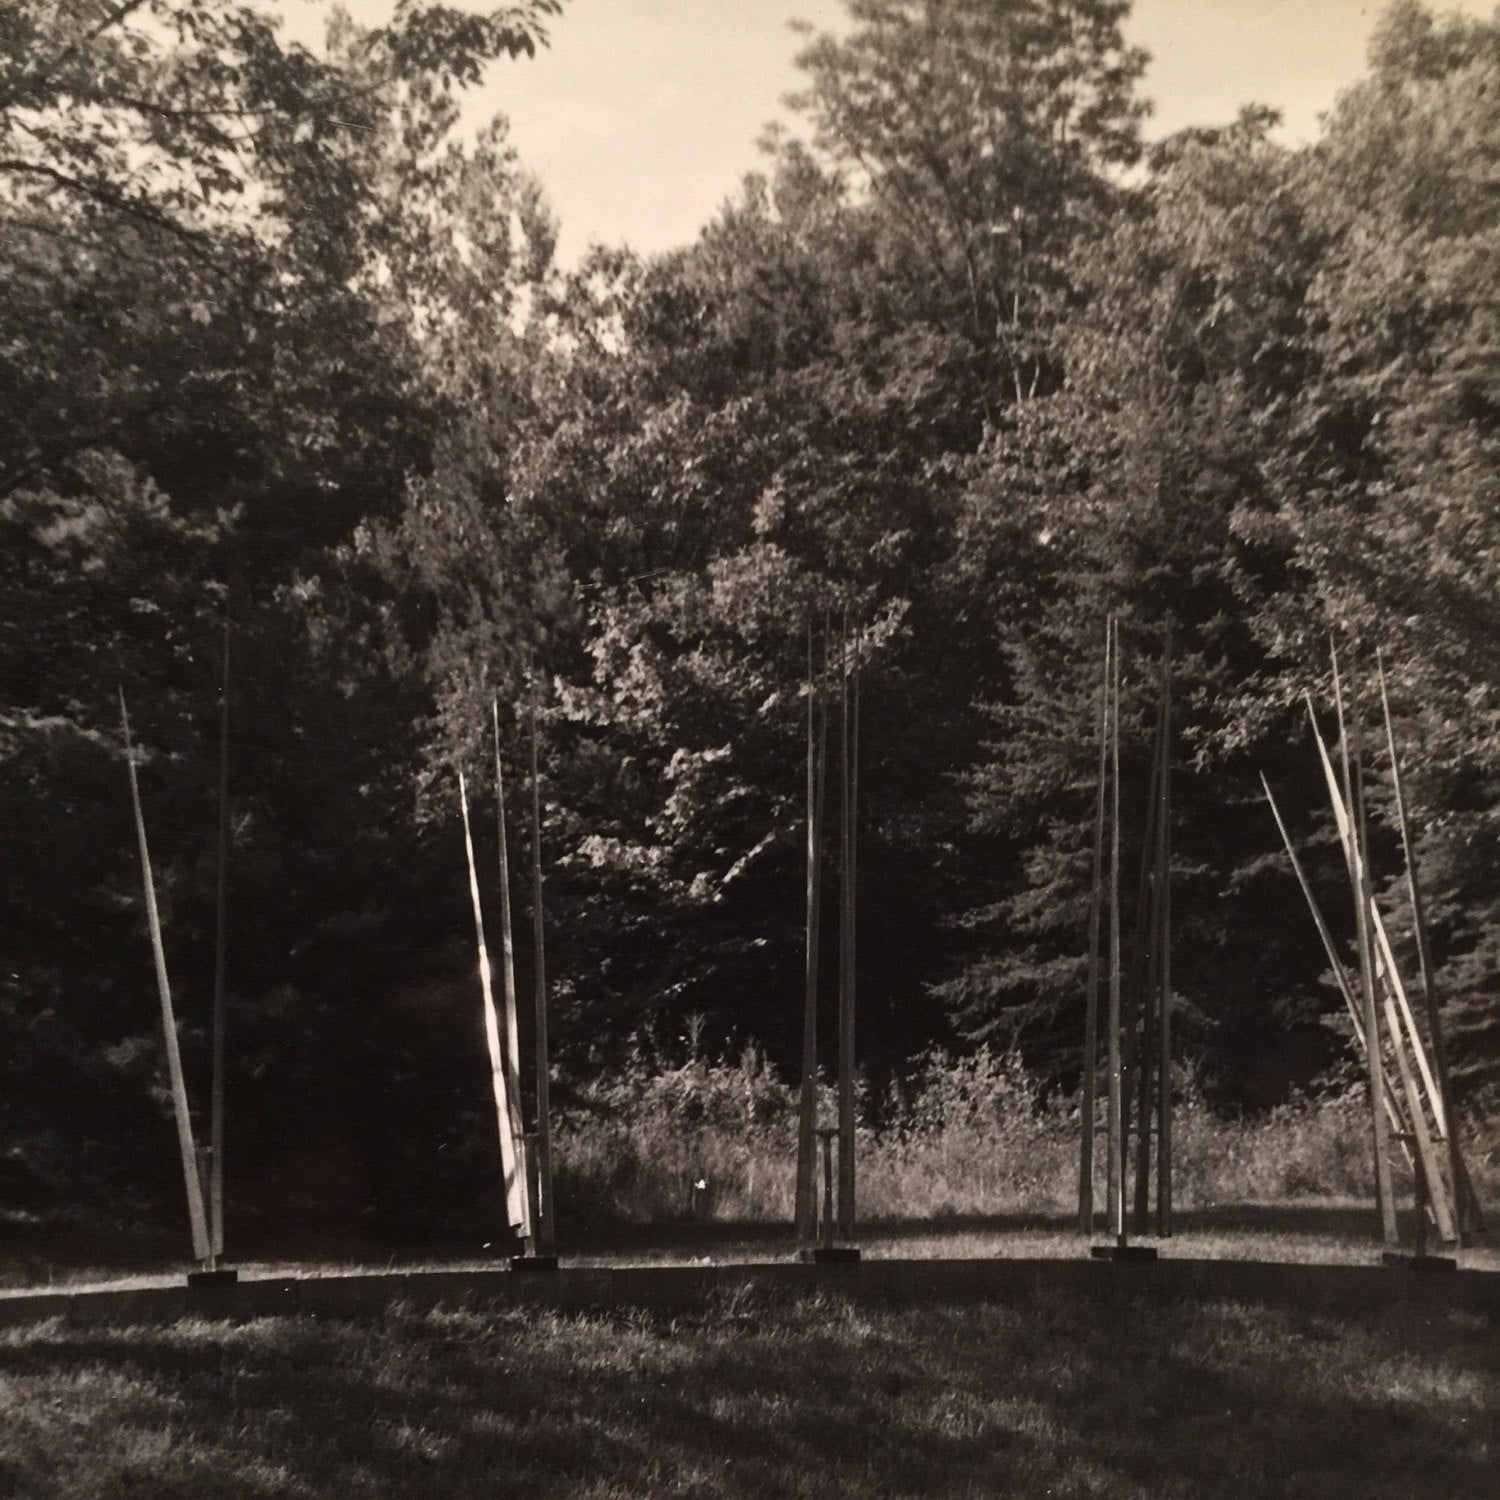 George Rickey Kinetic Sculpture Photograph - Marked Studio Estate Collection - Peristyle - Six Lines - Rare - East Chatham New York